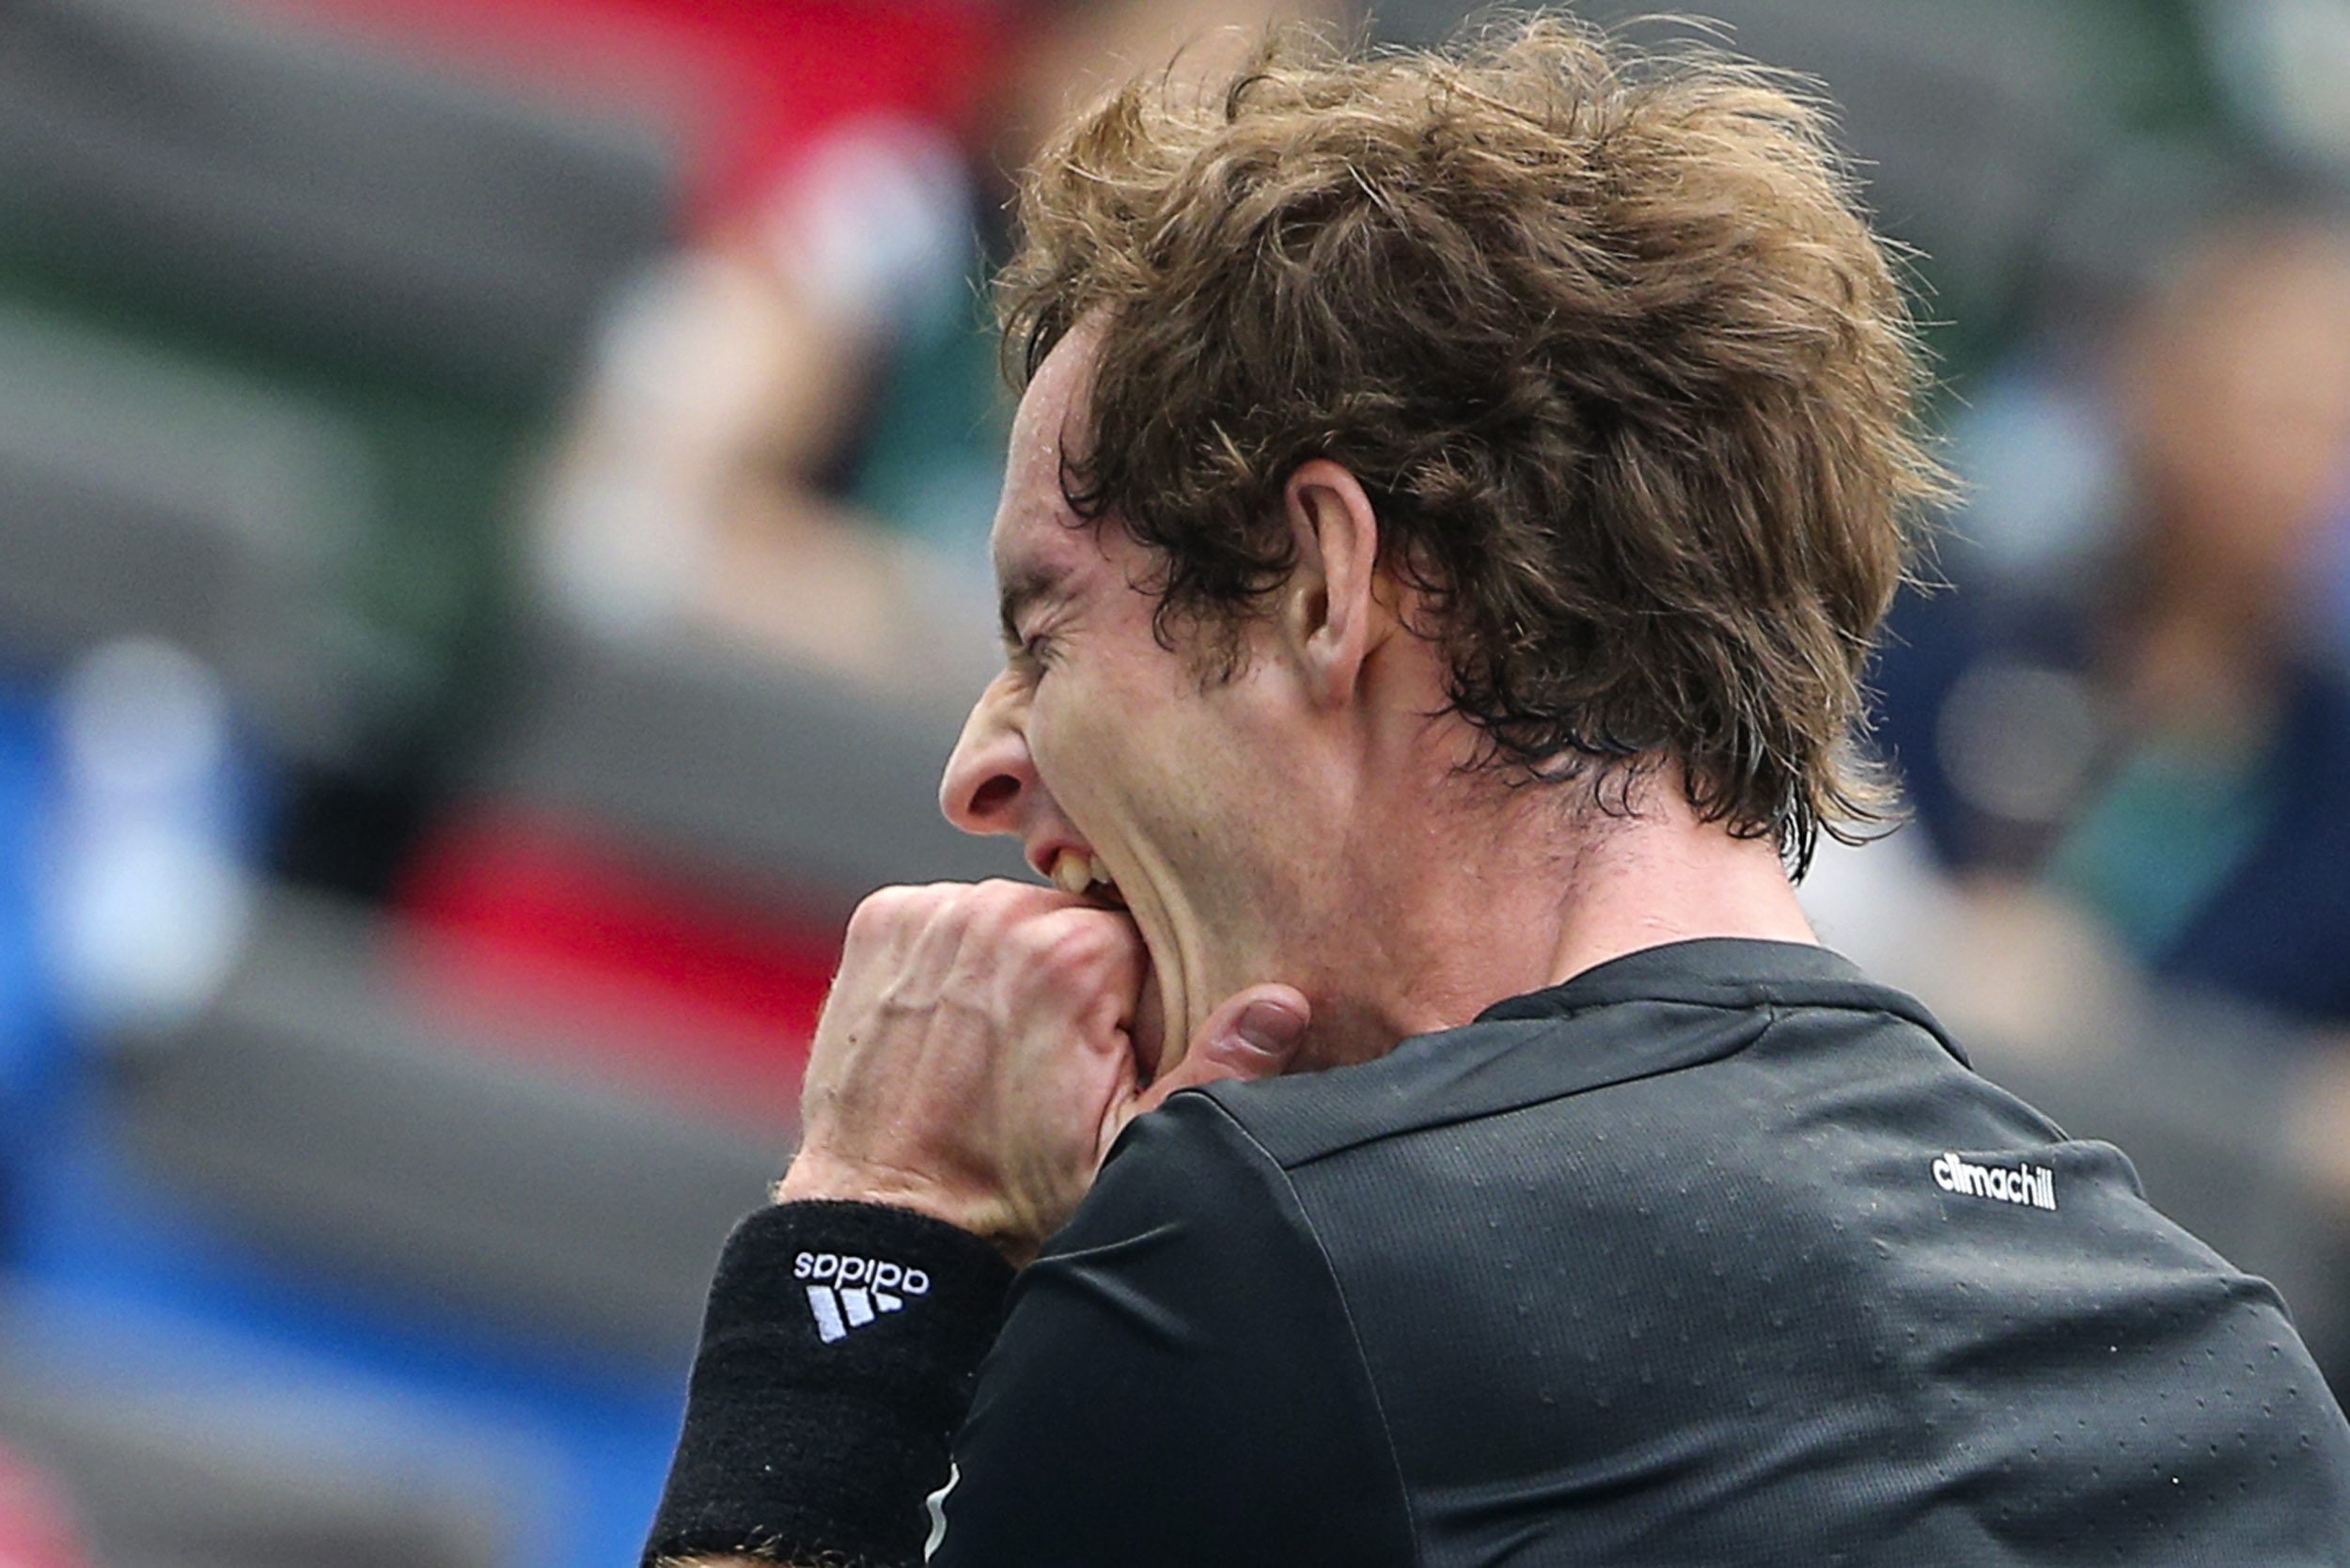 Britain's Andy Murray gets upset with himself as David Ferrer begins to reel him him. Photo: EPA